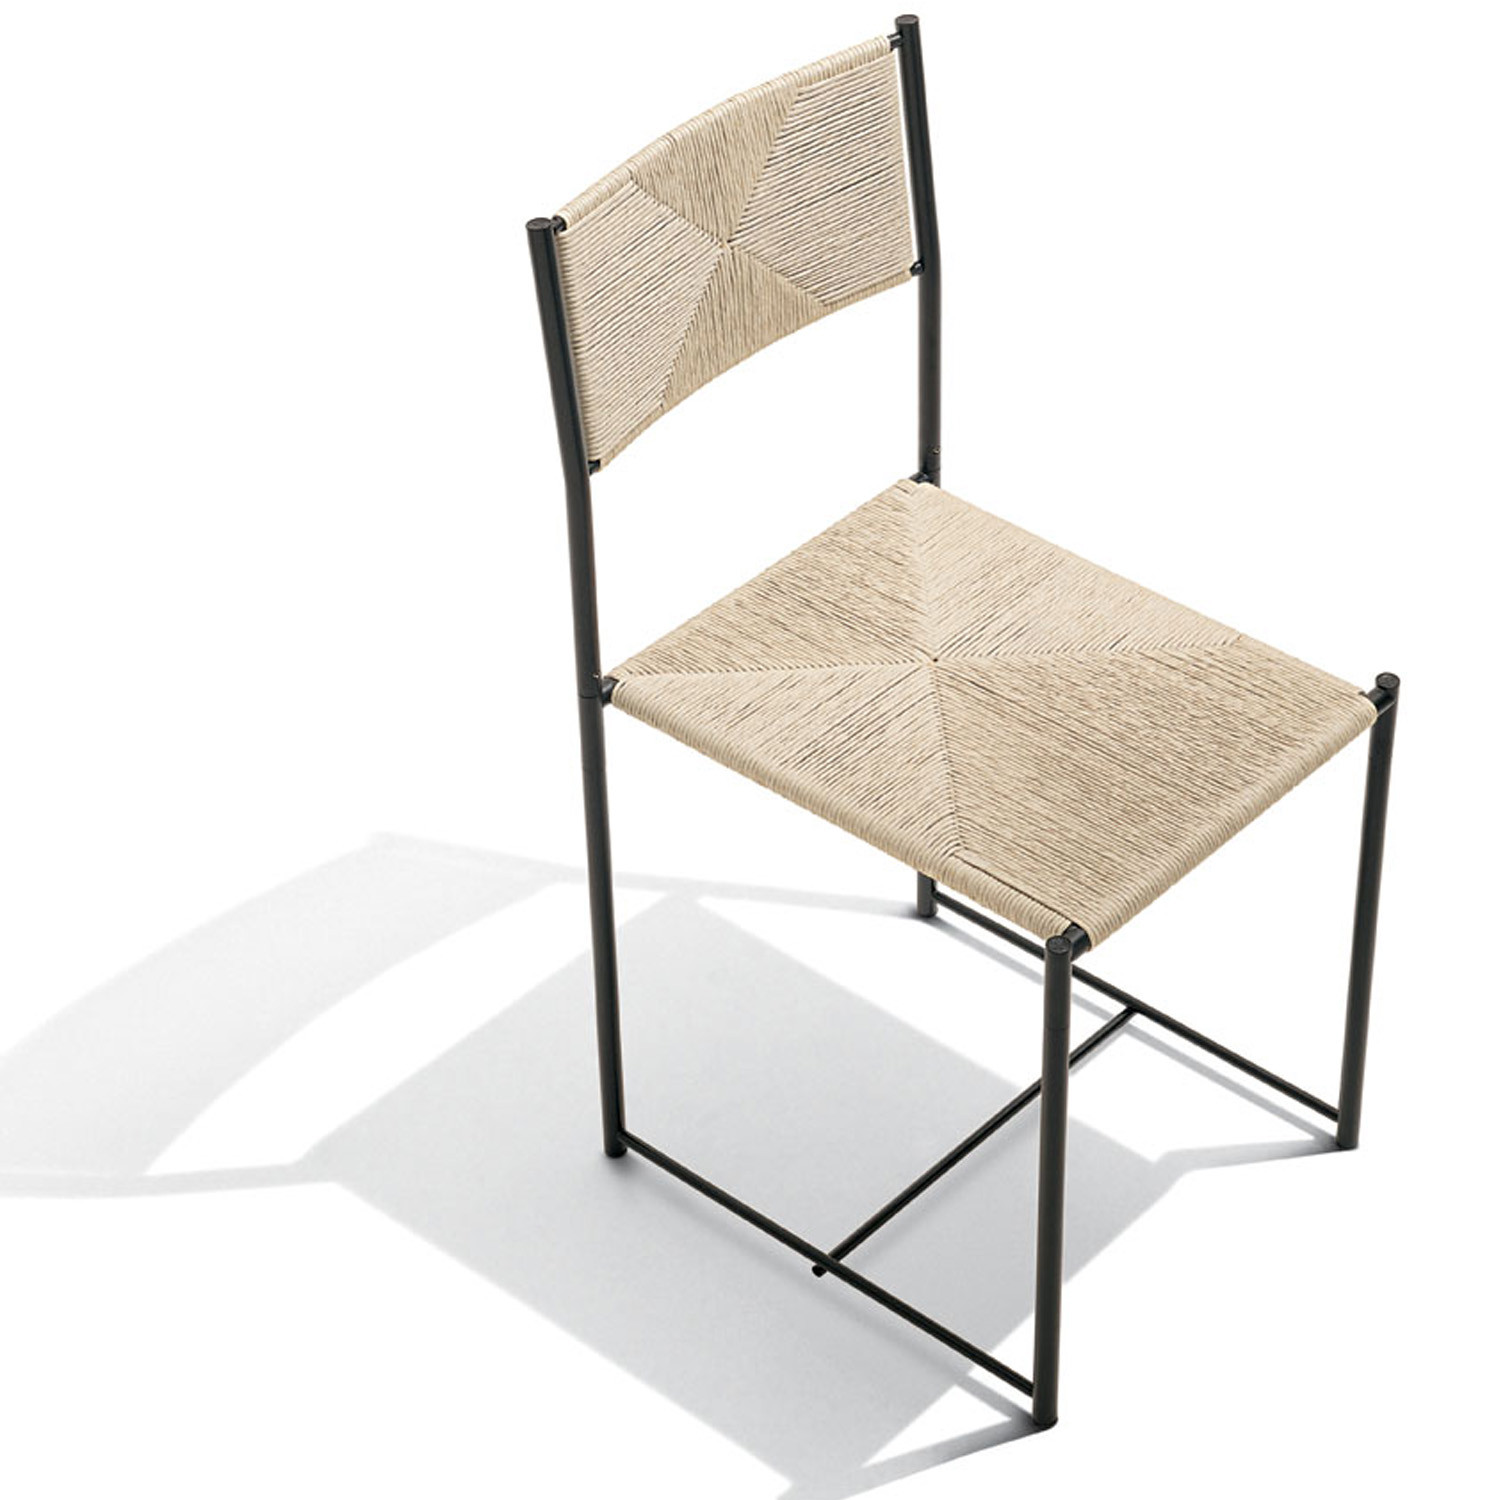 Paludis 4-Leg Chair with support